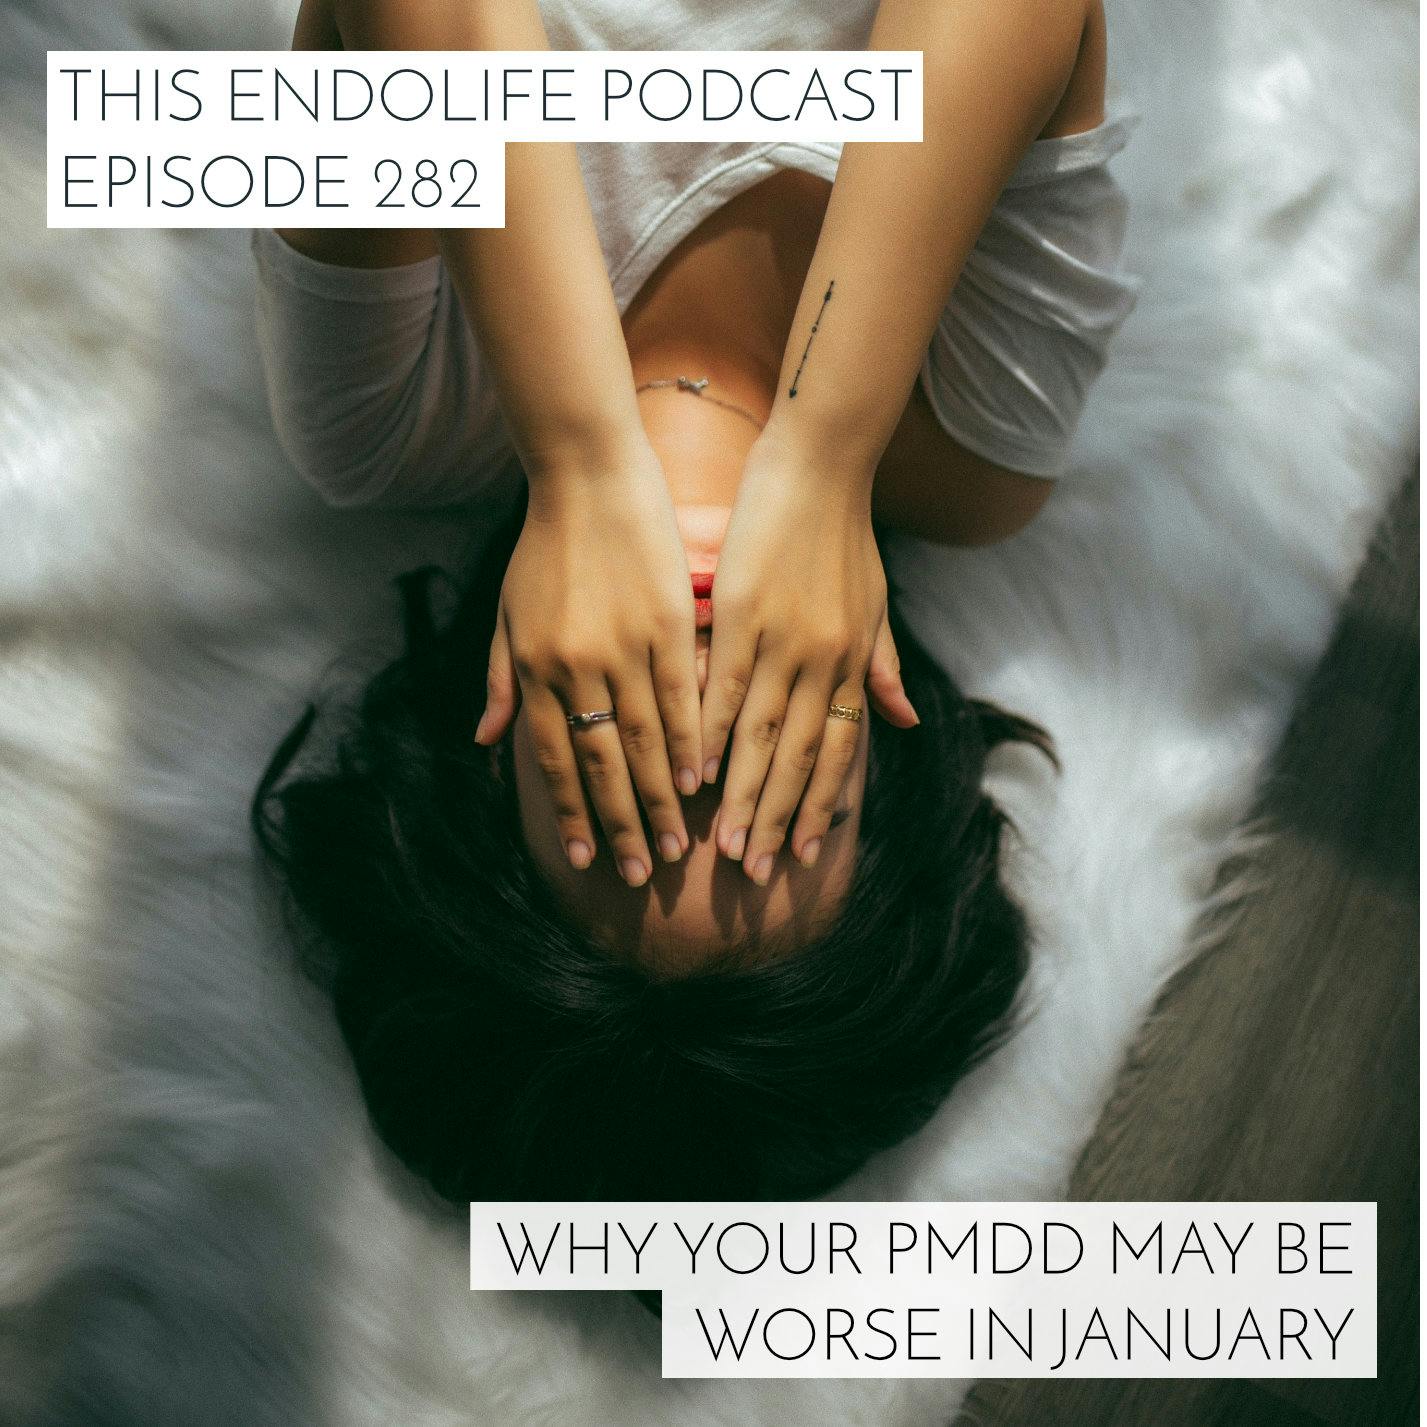 Why Your PMDD May Be Worse in January